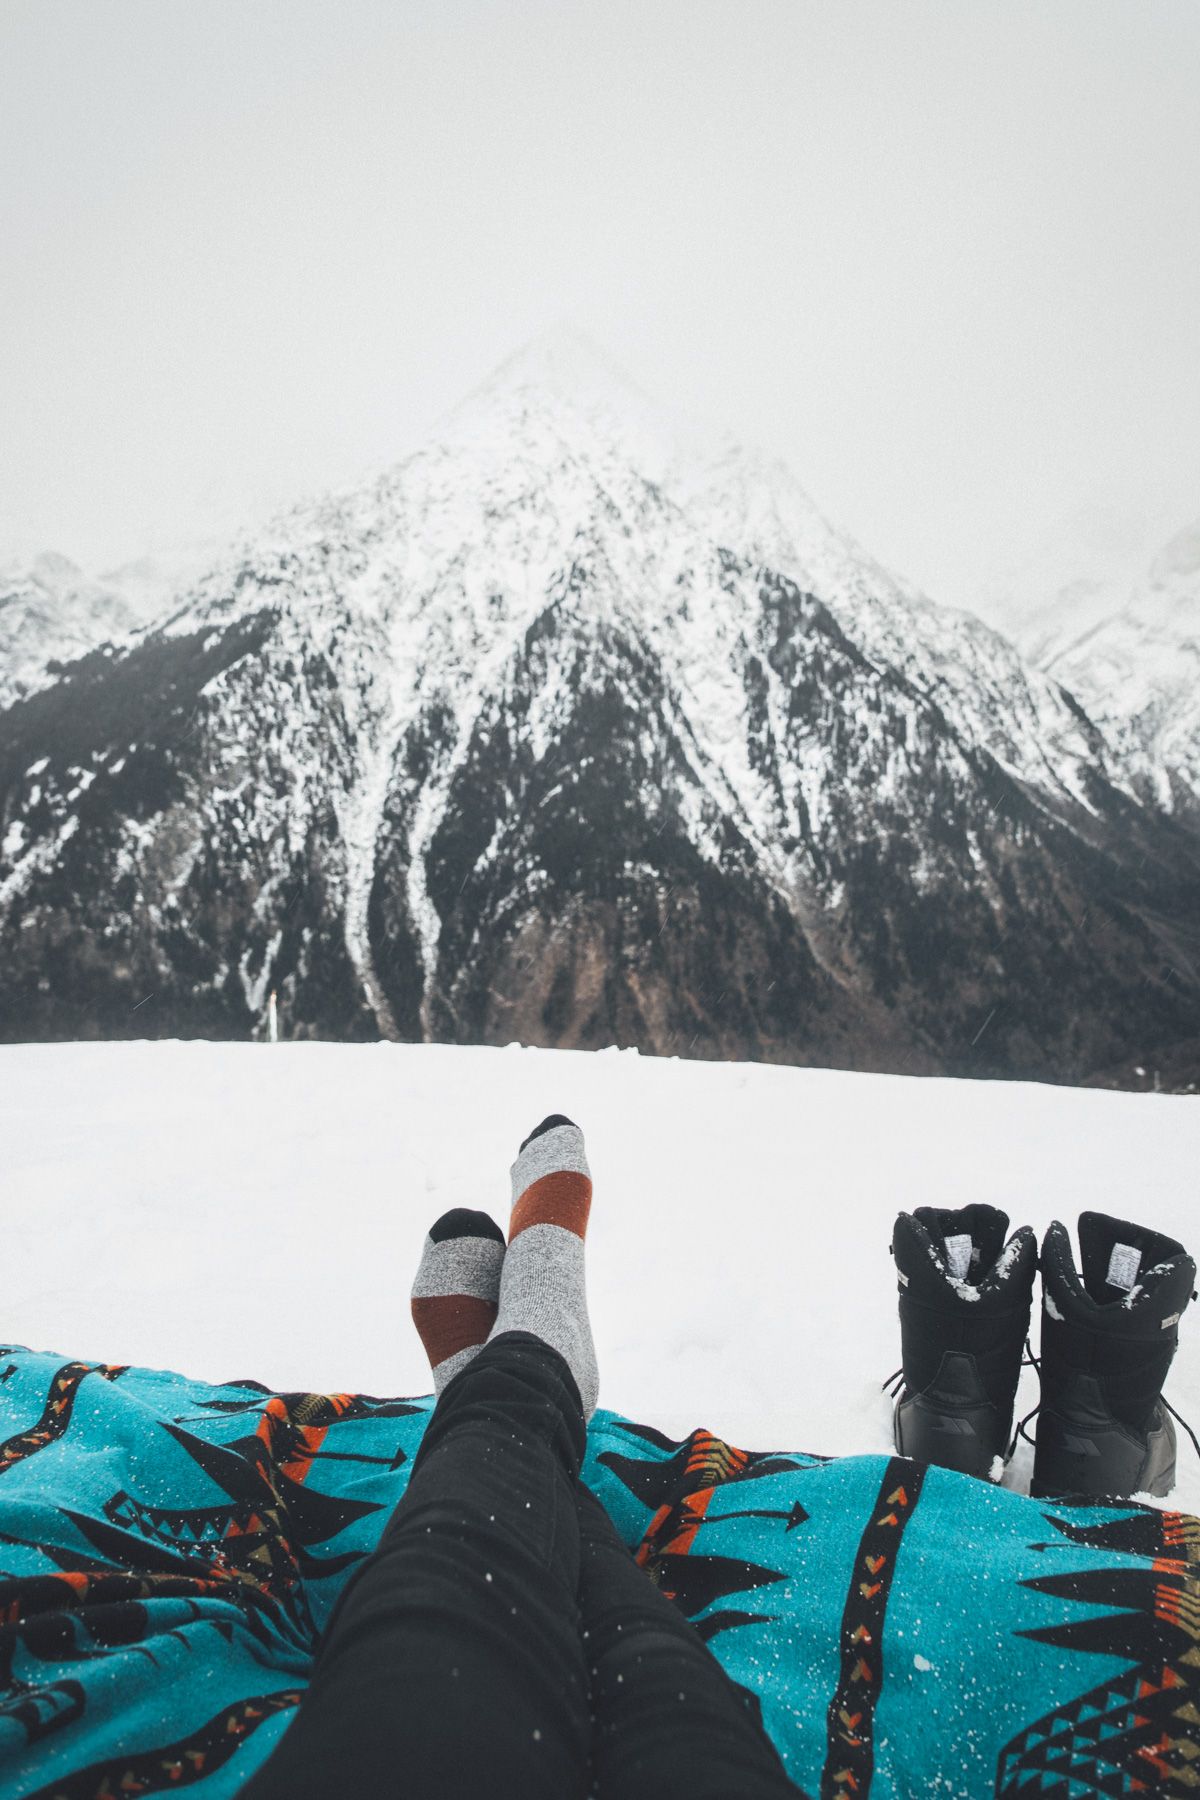 A POV-shot of a pair of feet wearing socks, lounging on a turquoise quilt on a snowy mountain-top, looking out at a wintry mountain landscape. 